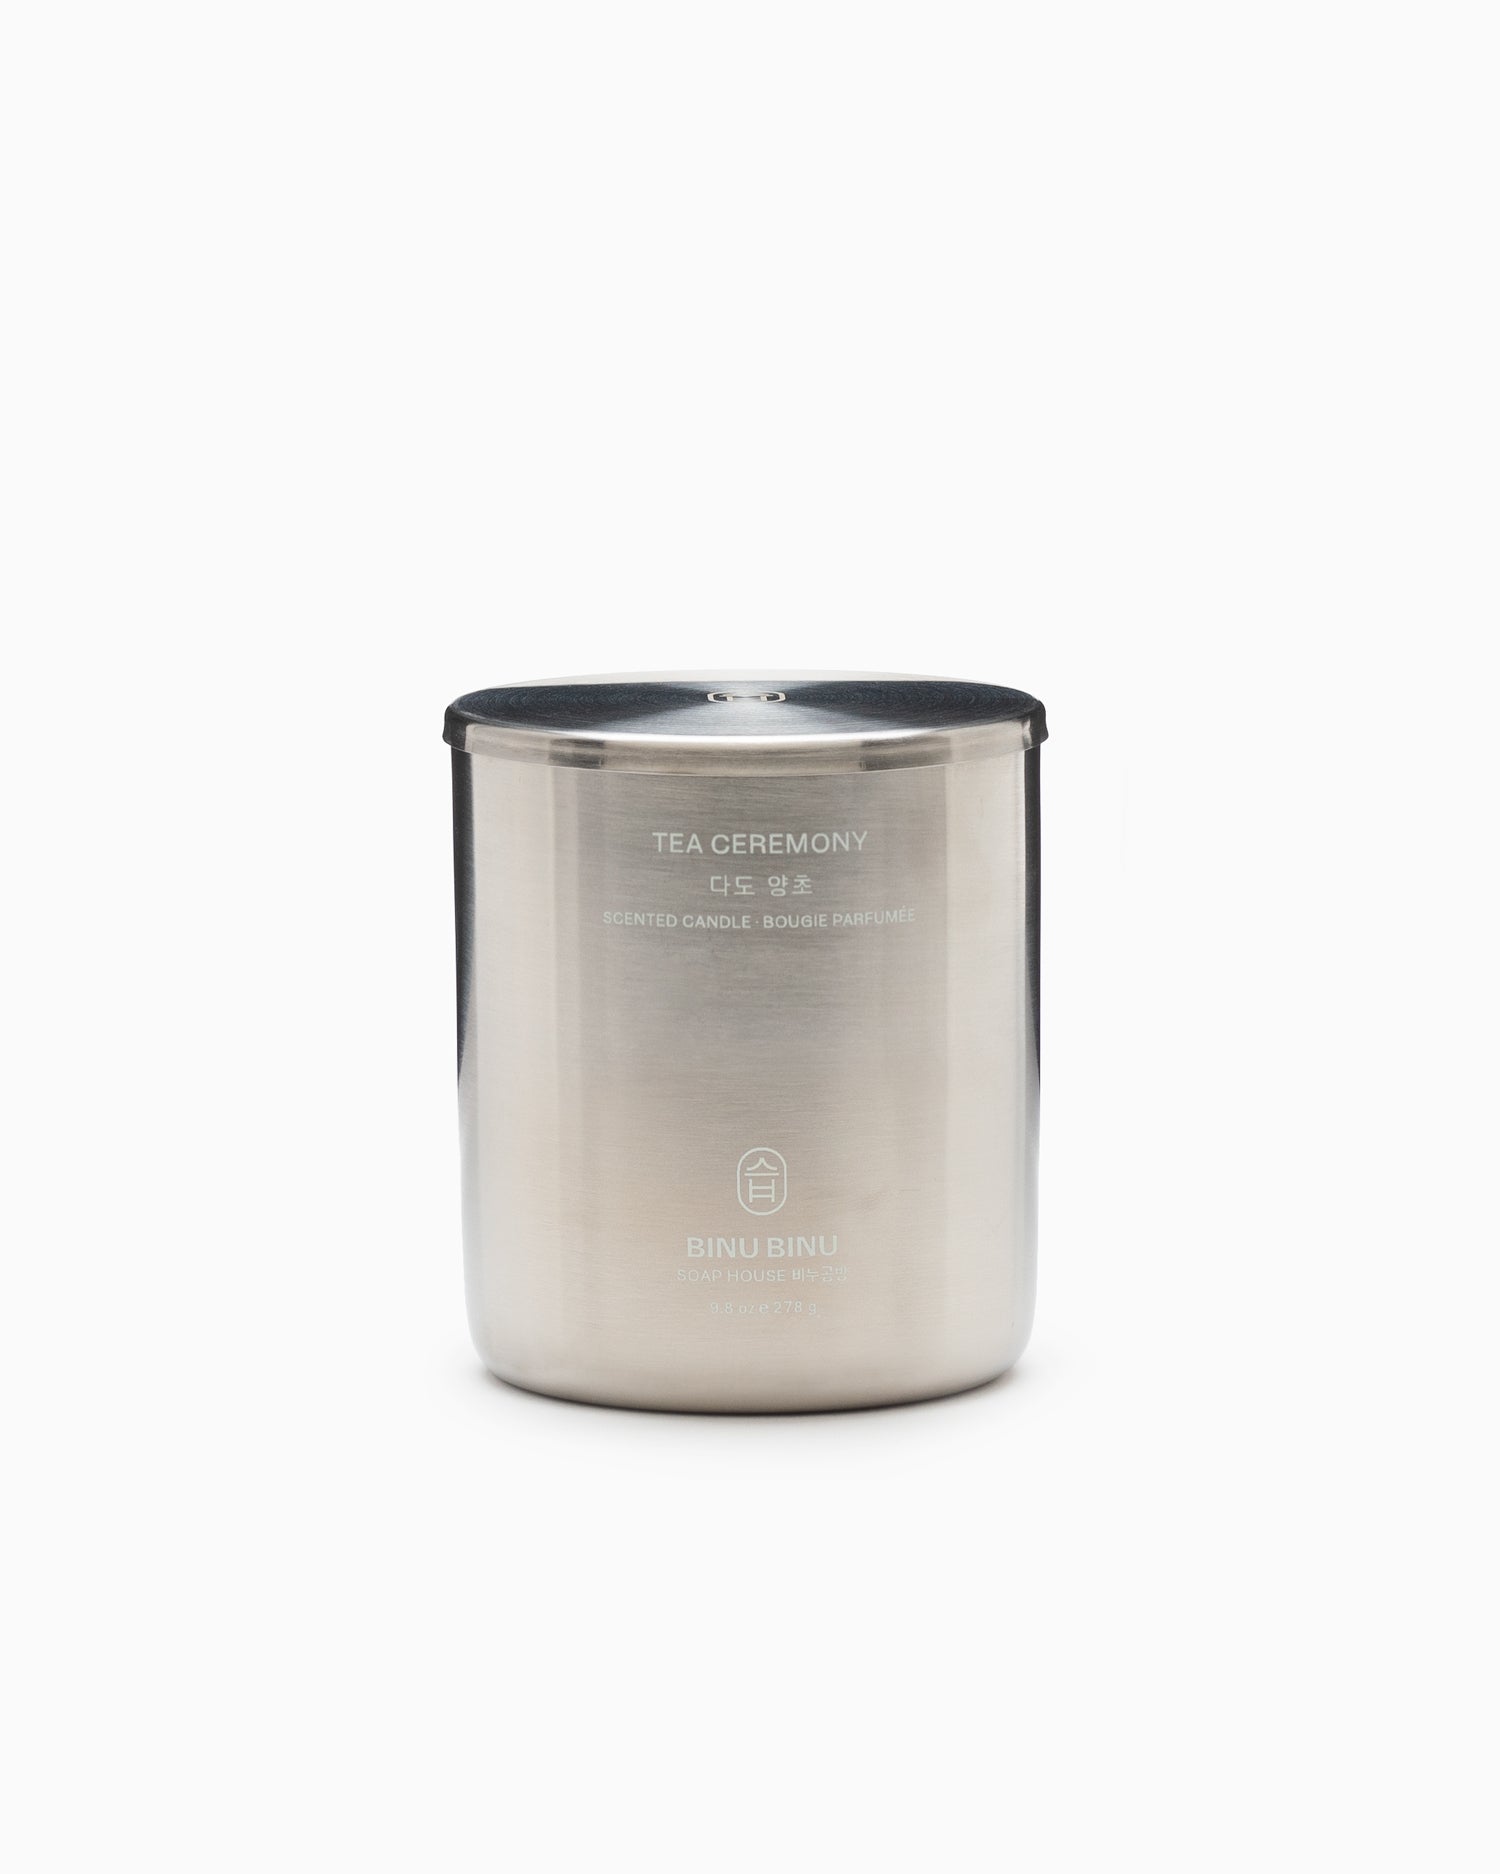 Tea Ceremony - Scented Candle